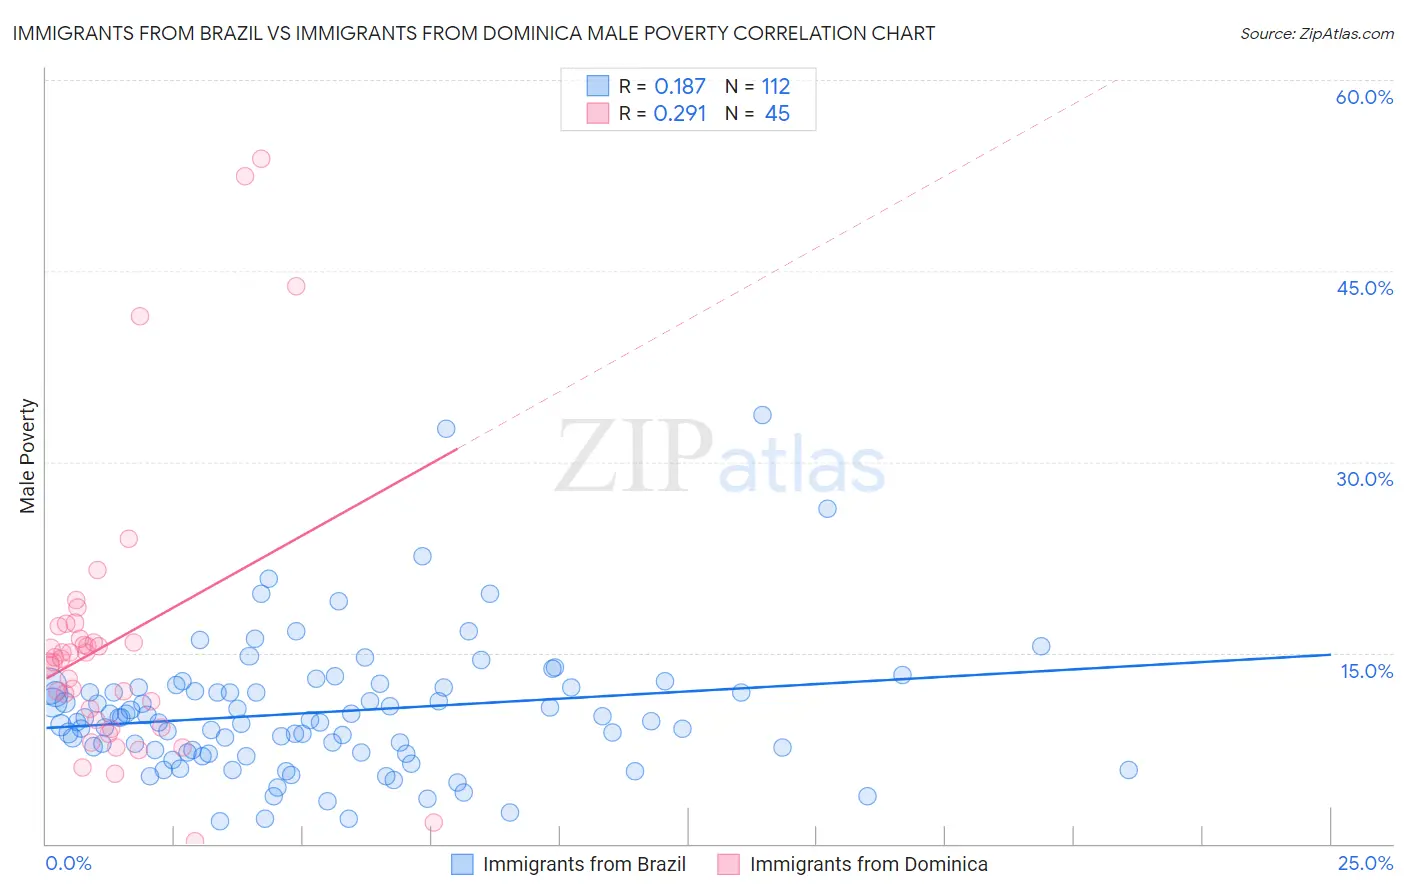 Immigrants from Brazil vs Immigrants from Dominica Male Poverty